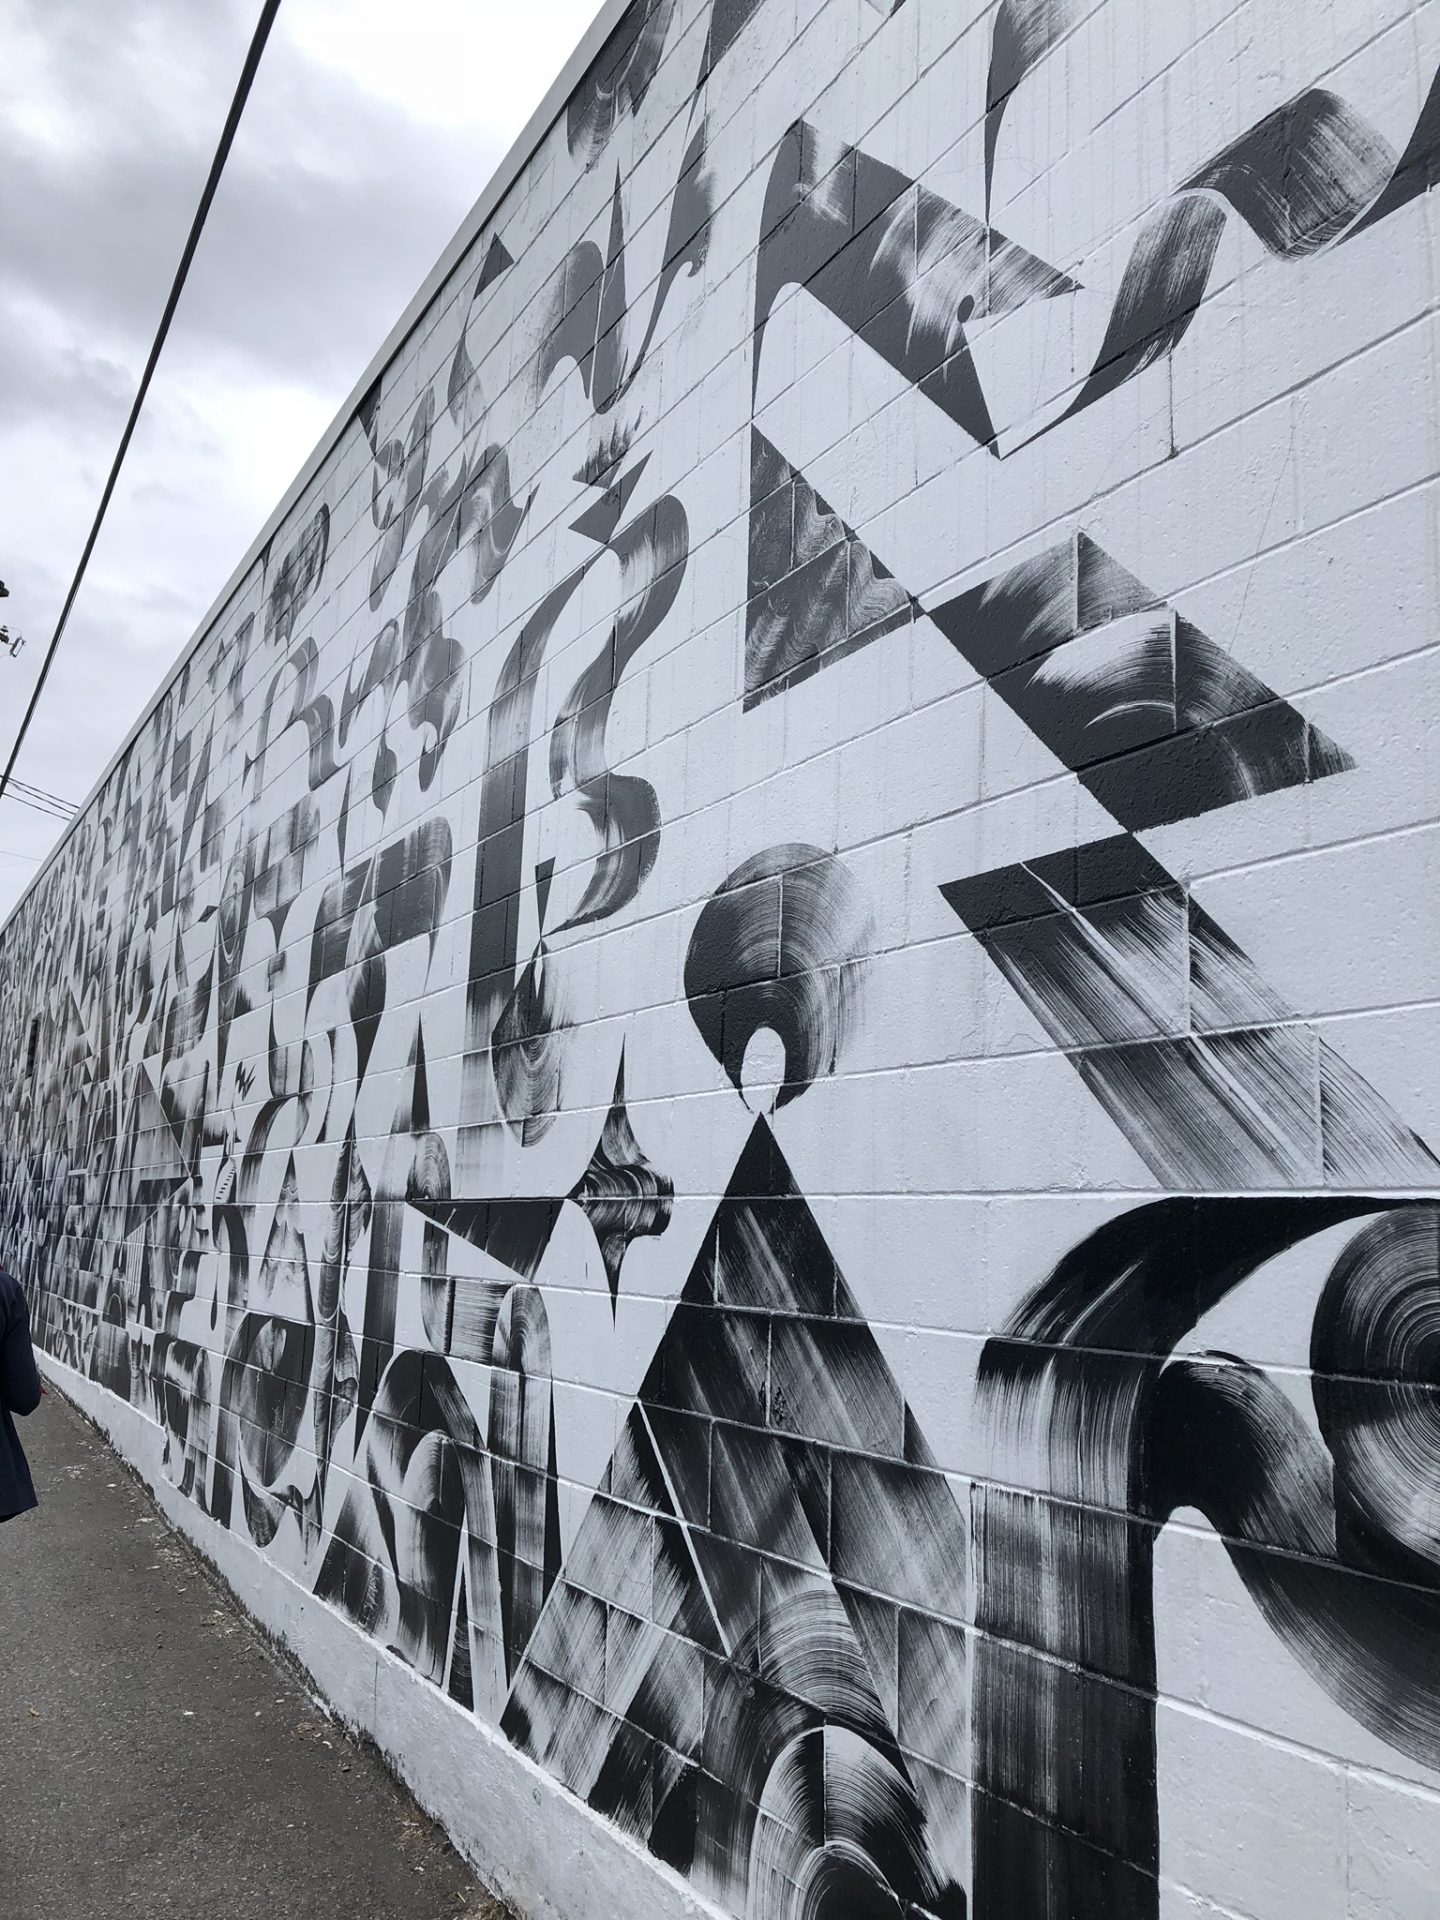 Black and white mural in Vancouver